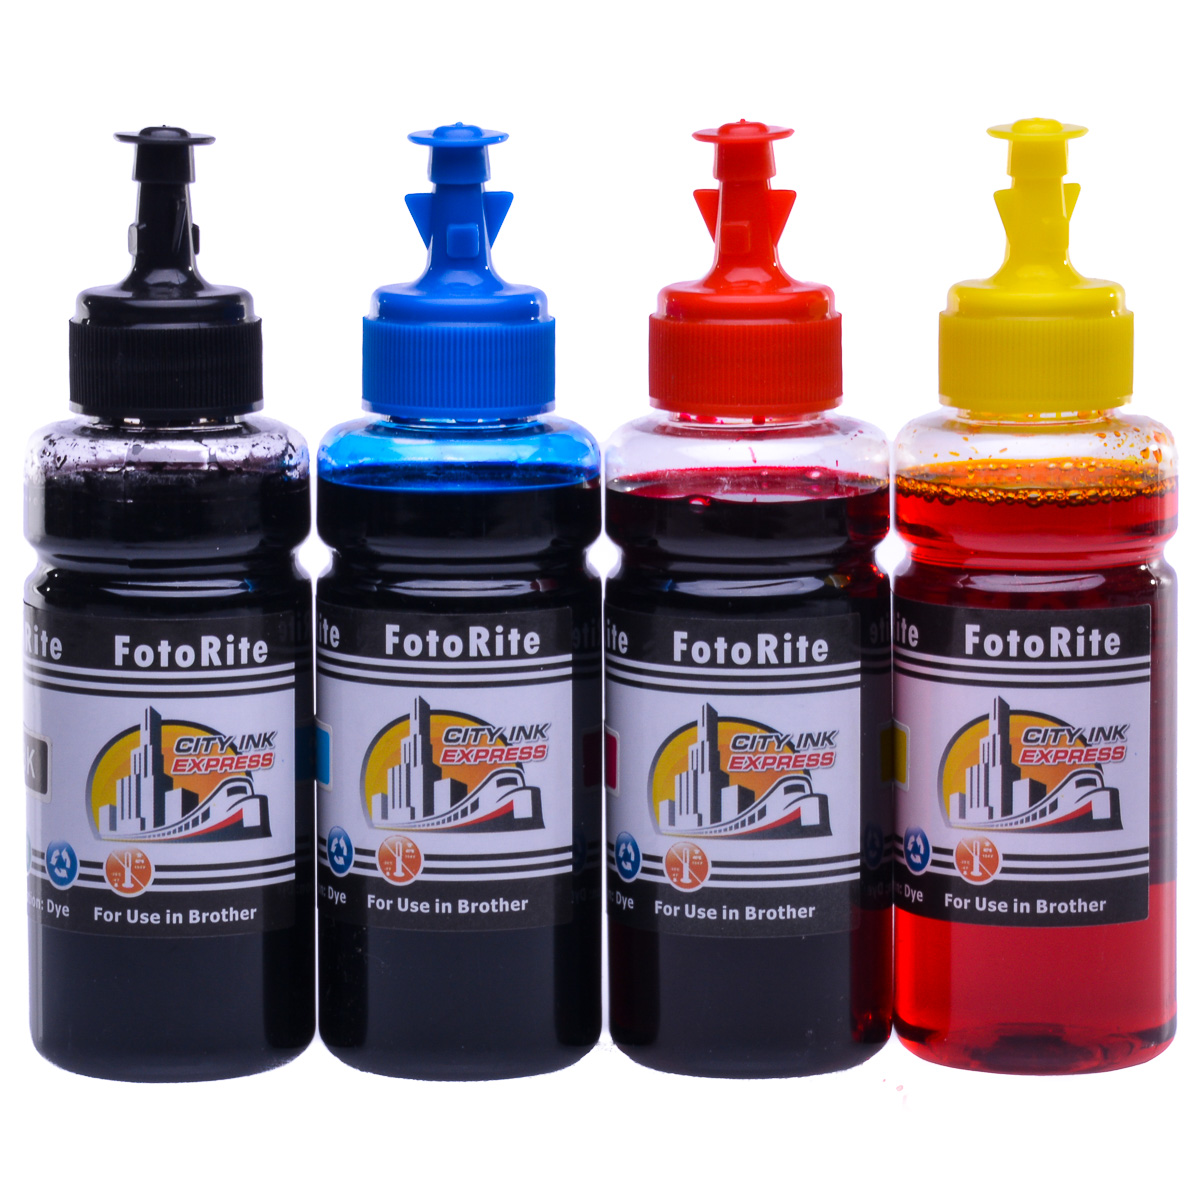 Cheap Multipack dye ink refill replaces Brother Fax 1560